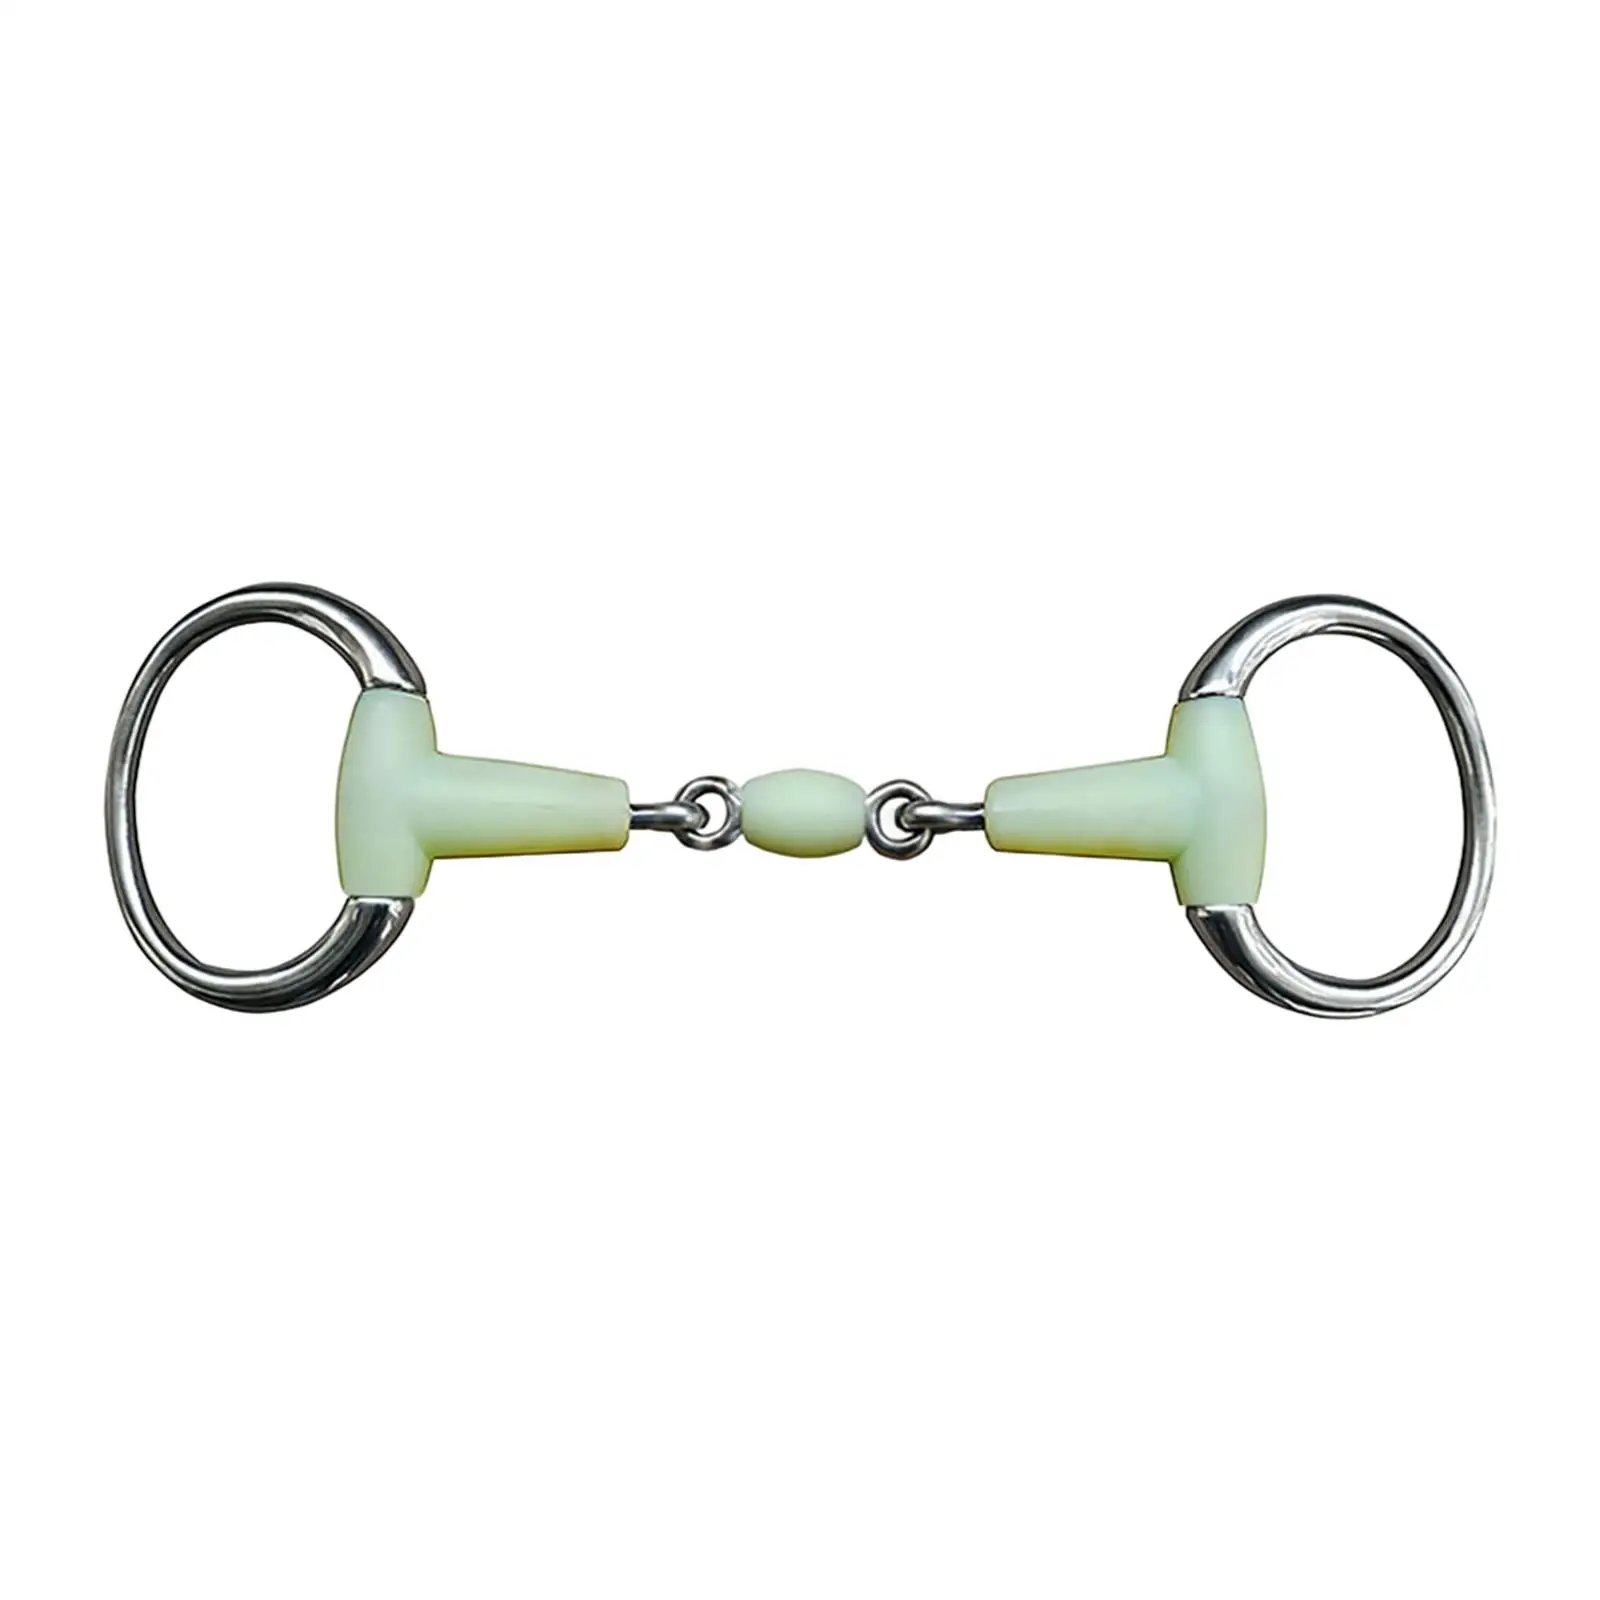 Horse Ring Bit Horse Training Snaffle Tool for Draft Horses Mules Outdoor Sports